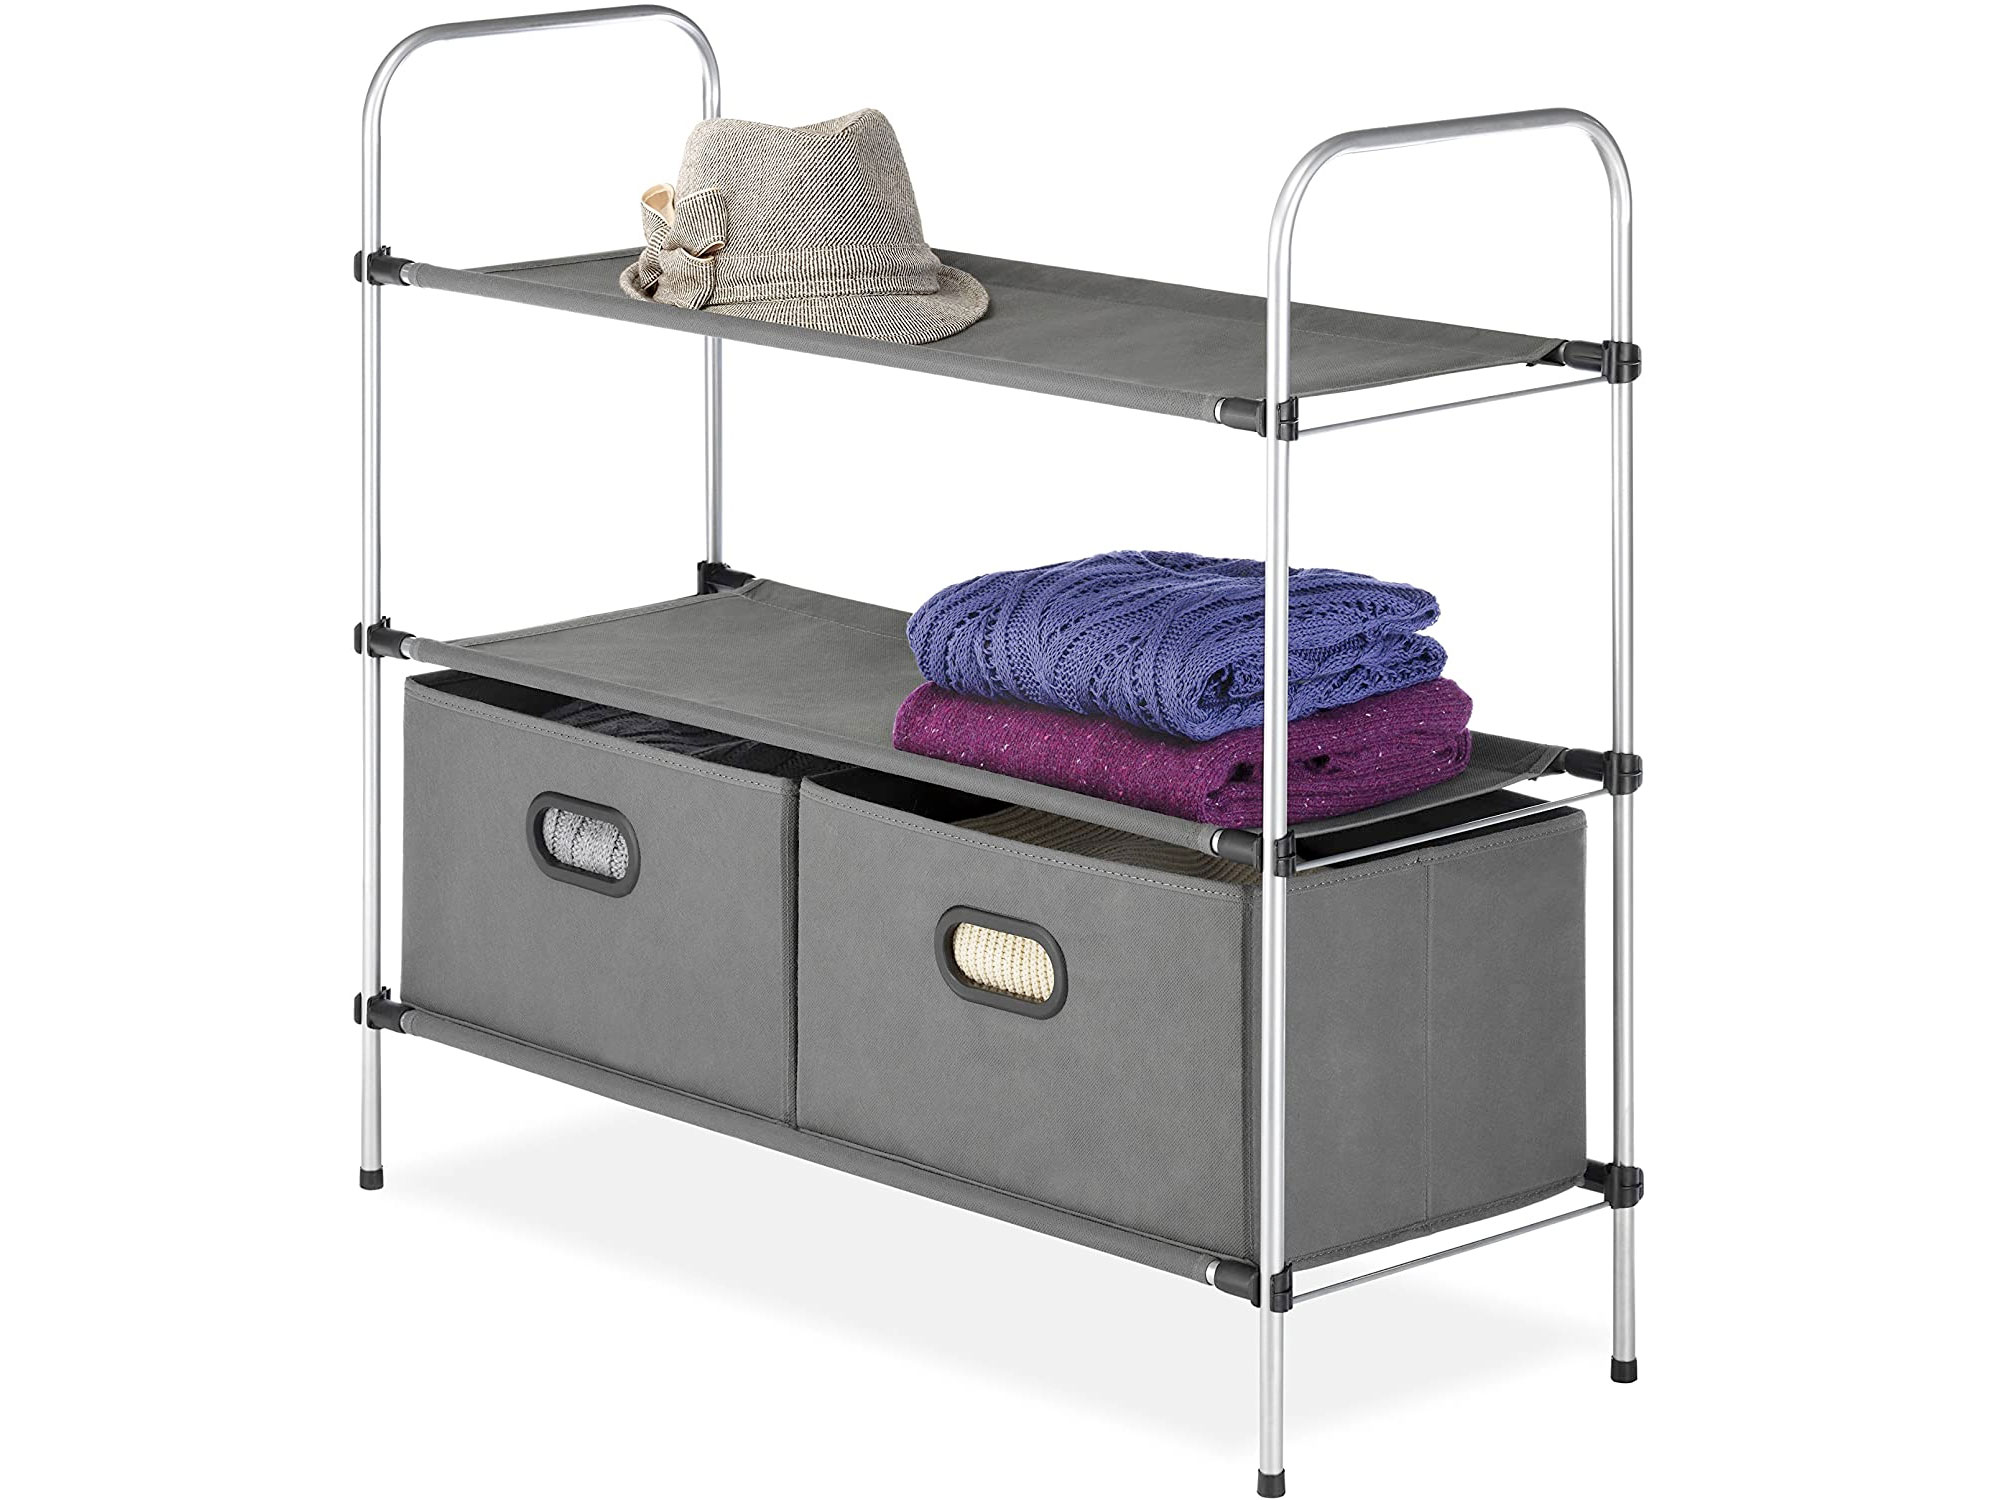 Amazon：Closet Organizer Collection (3 Tier Shelves with 2 Collapsible Drawers)只賣$21.99